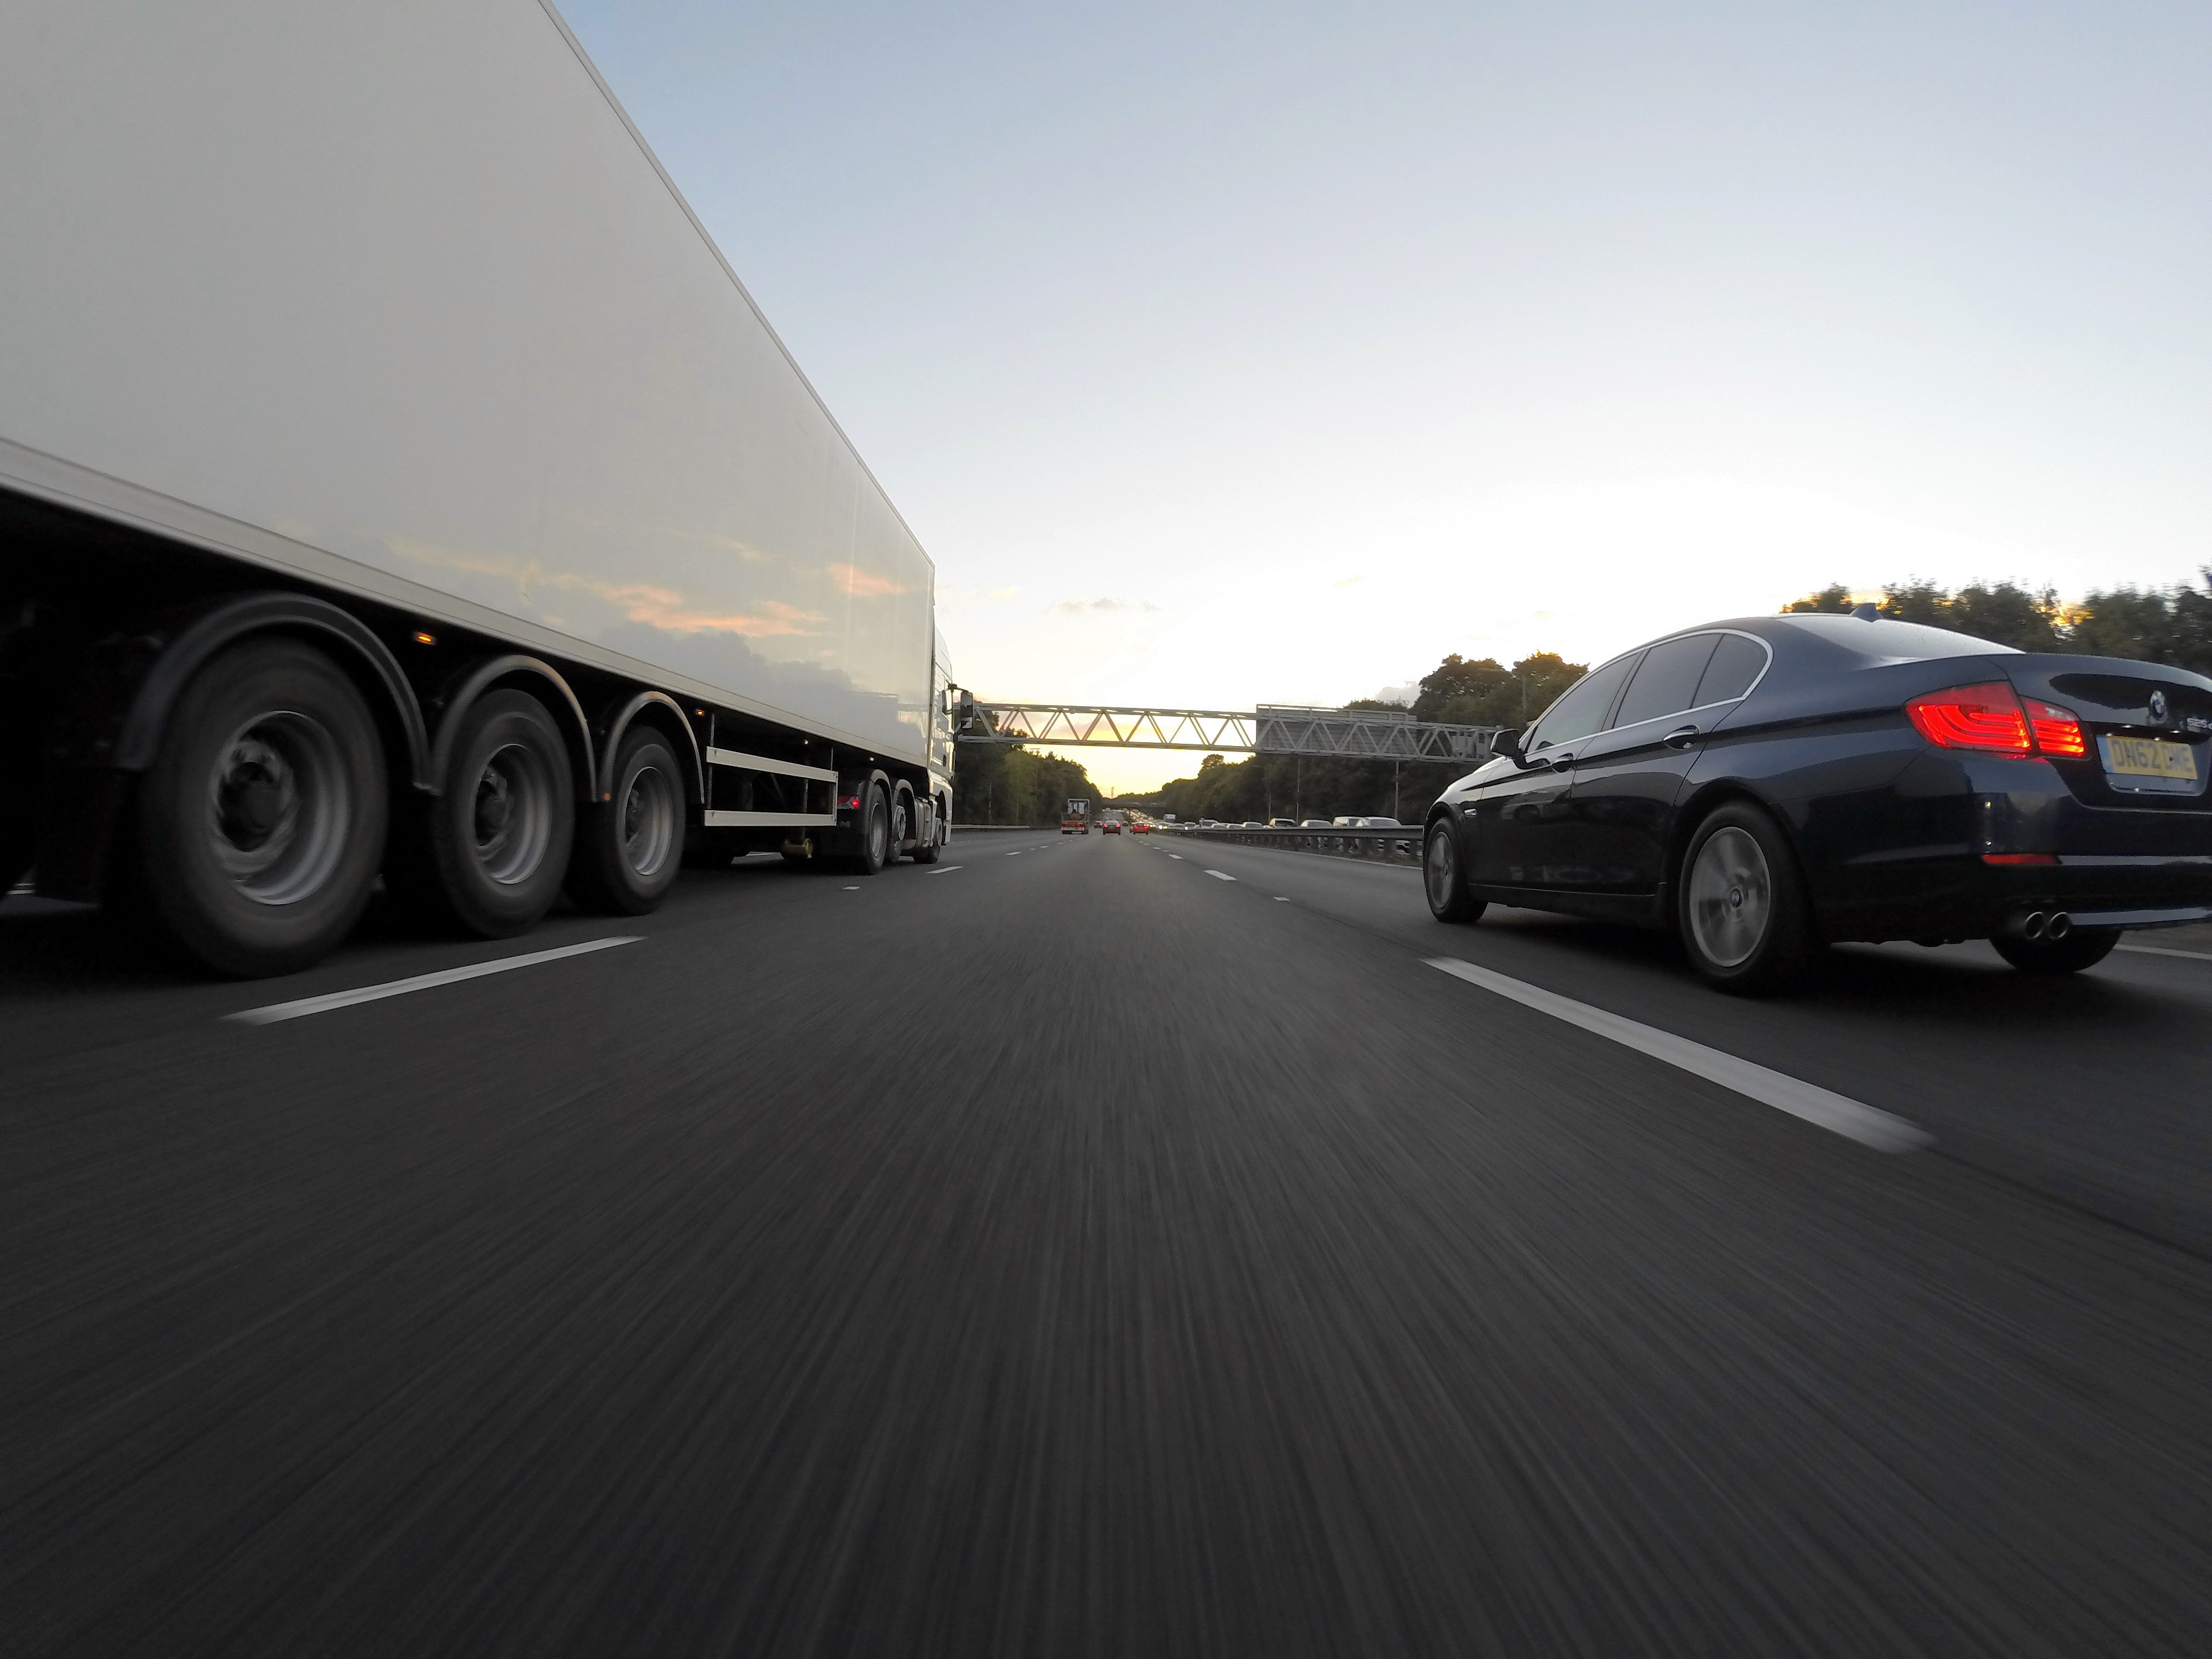 3 Things Non-Truck Drivers Should Know About Trucks